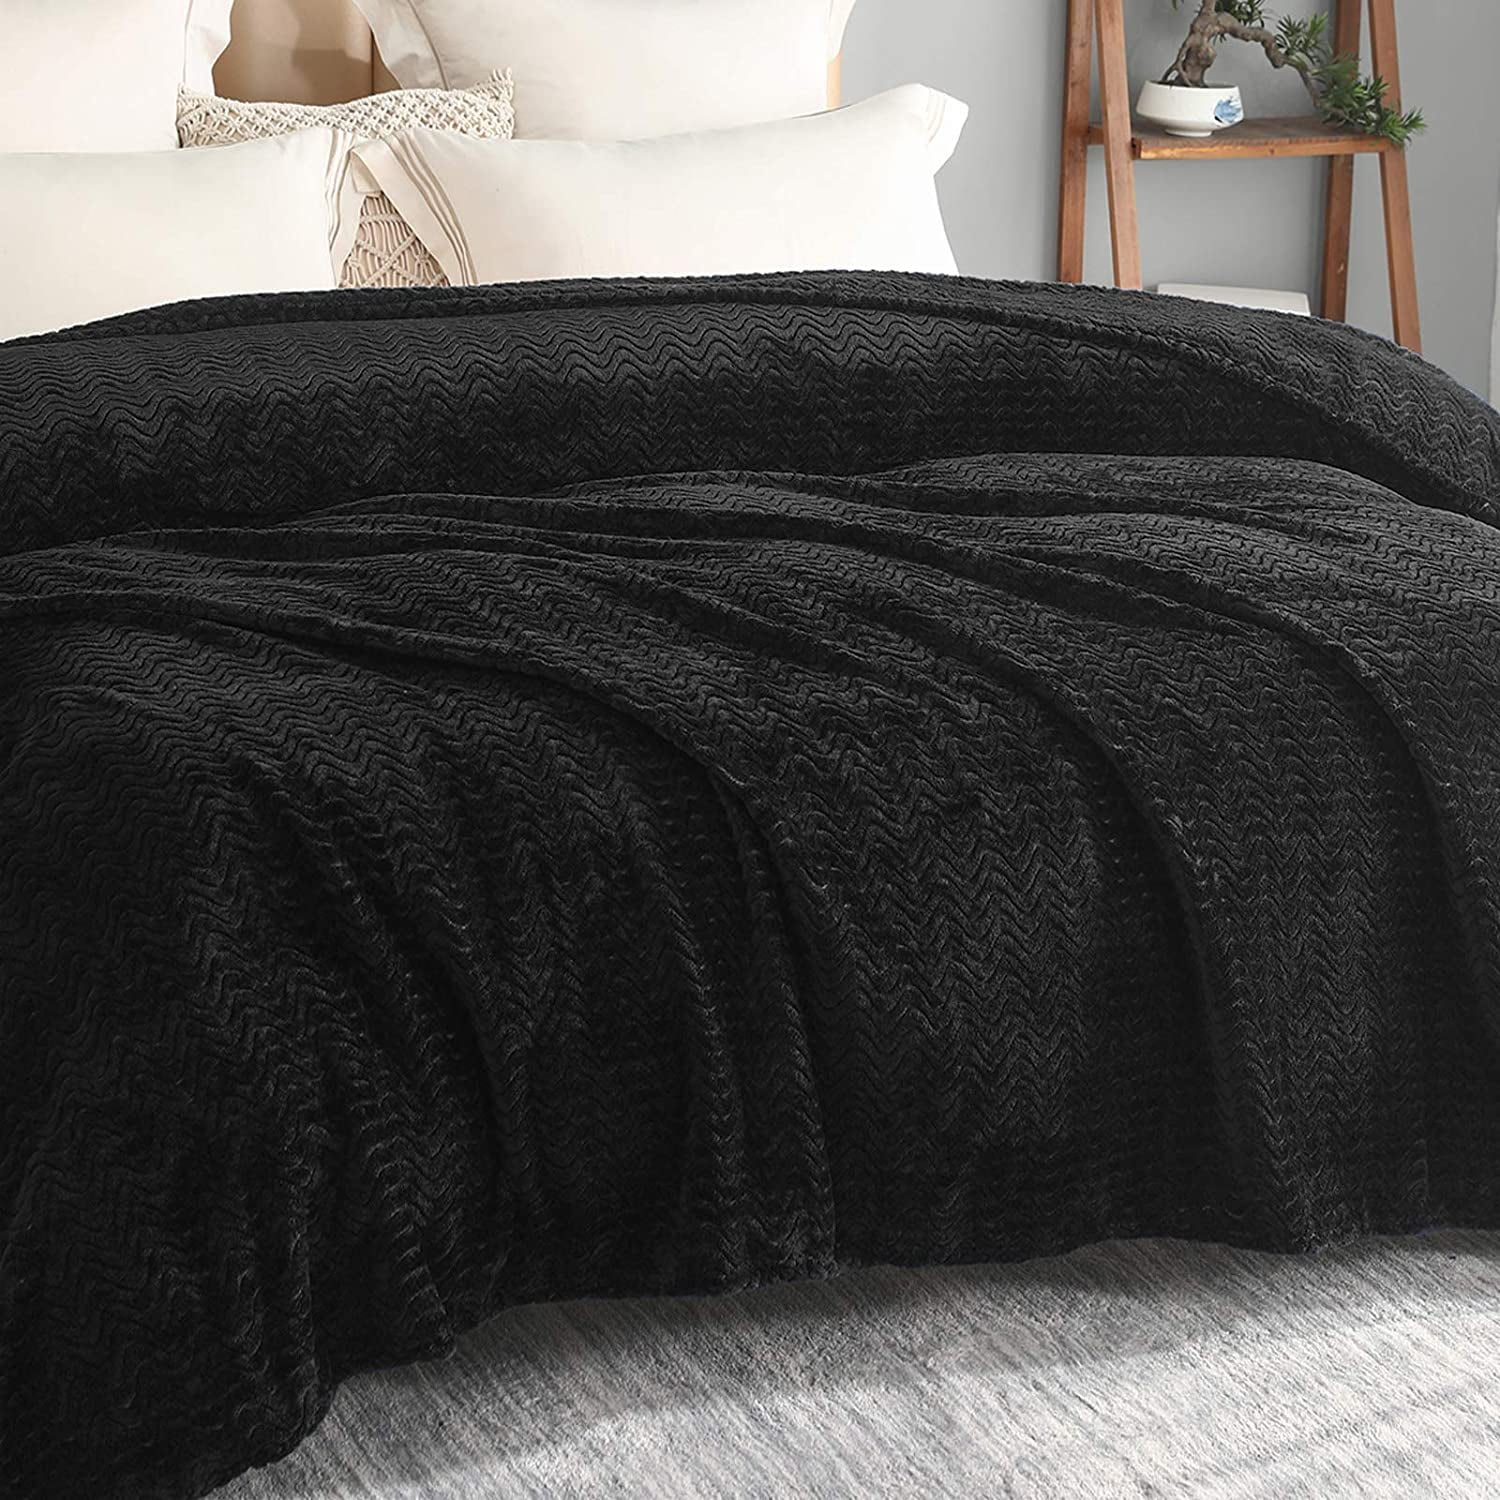 Warm and Cozy Exclusivo Mezcla Queen Size Jacquard Weave Wave Pattern Flannel Fleece Velvet Plush Bed Blanket as Bedspread/Coverlet/Bed Cover Lightweight - Soft 90 x 90,Black 